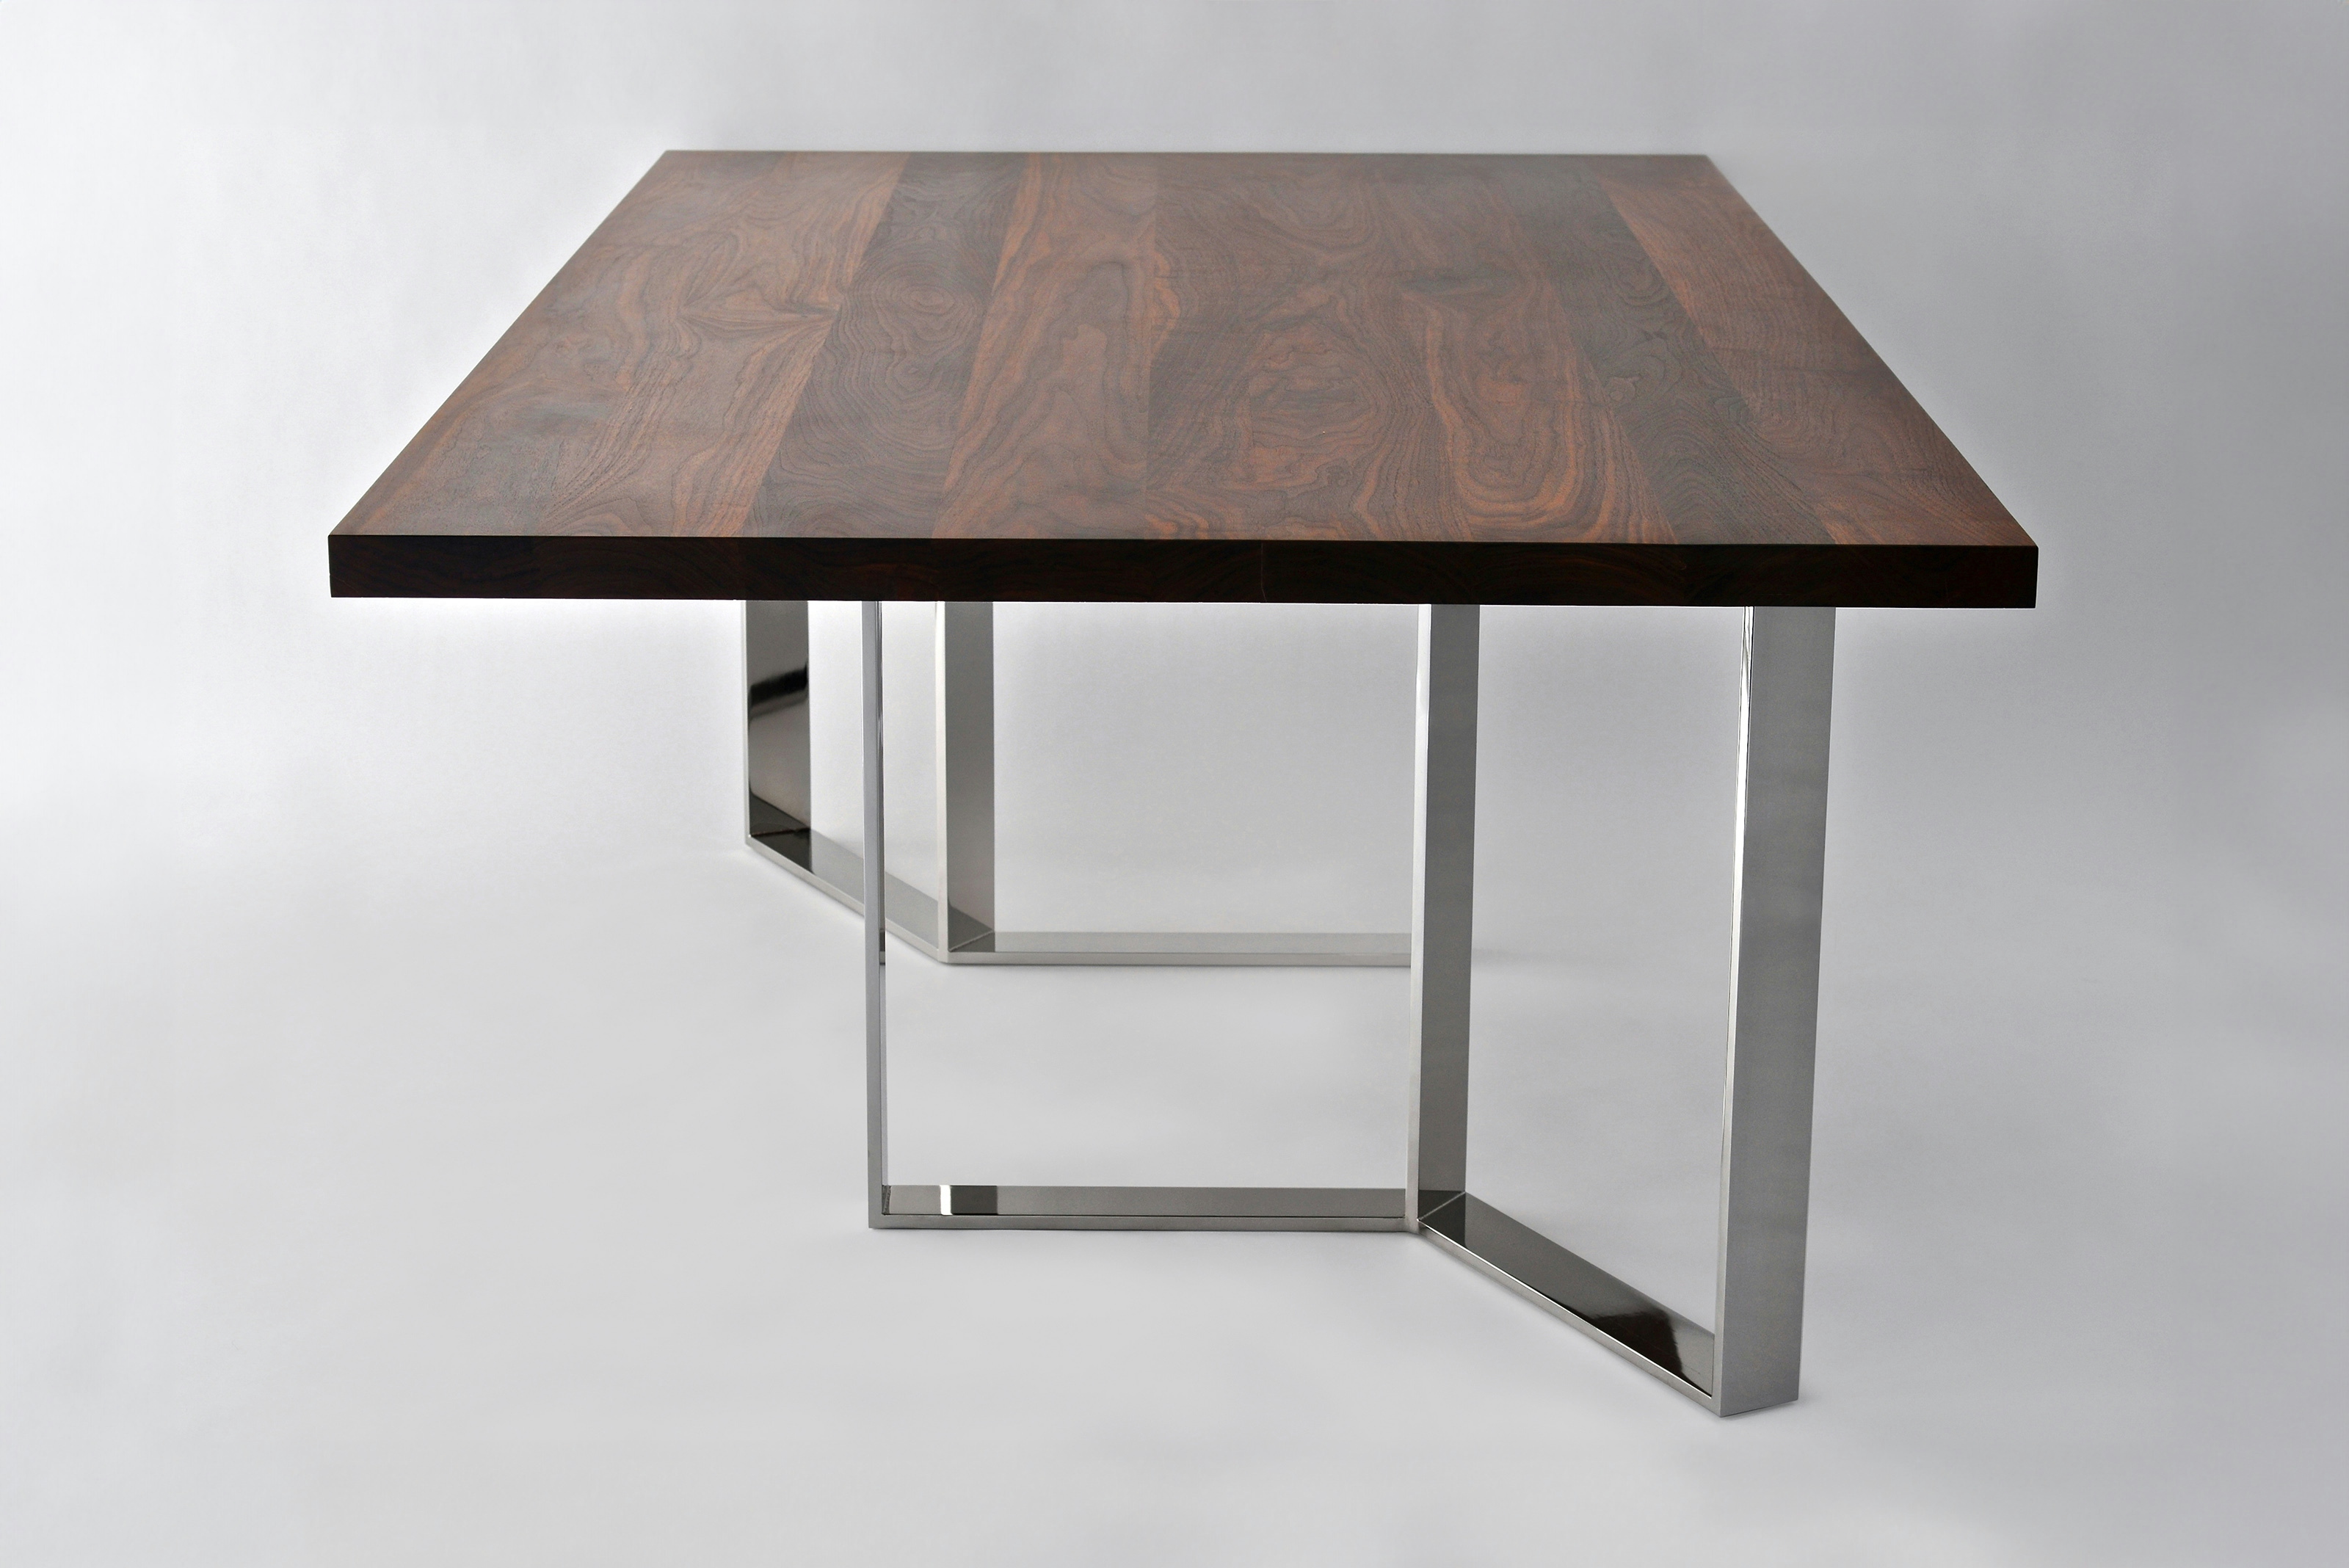 Phase Design Reza Feiz Roundhouse Dining Table 2 Product Page Web